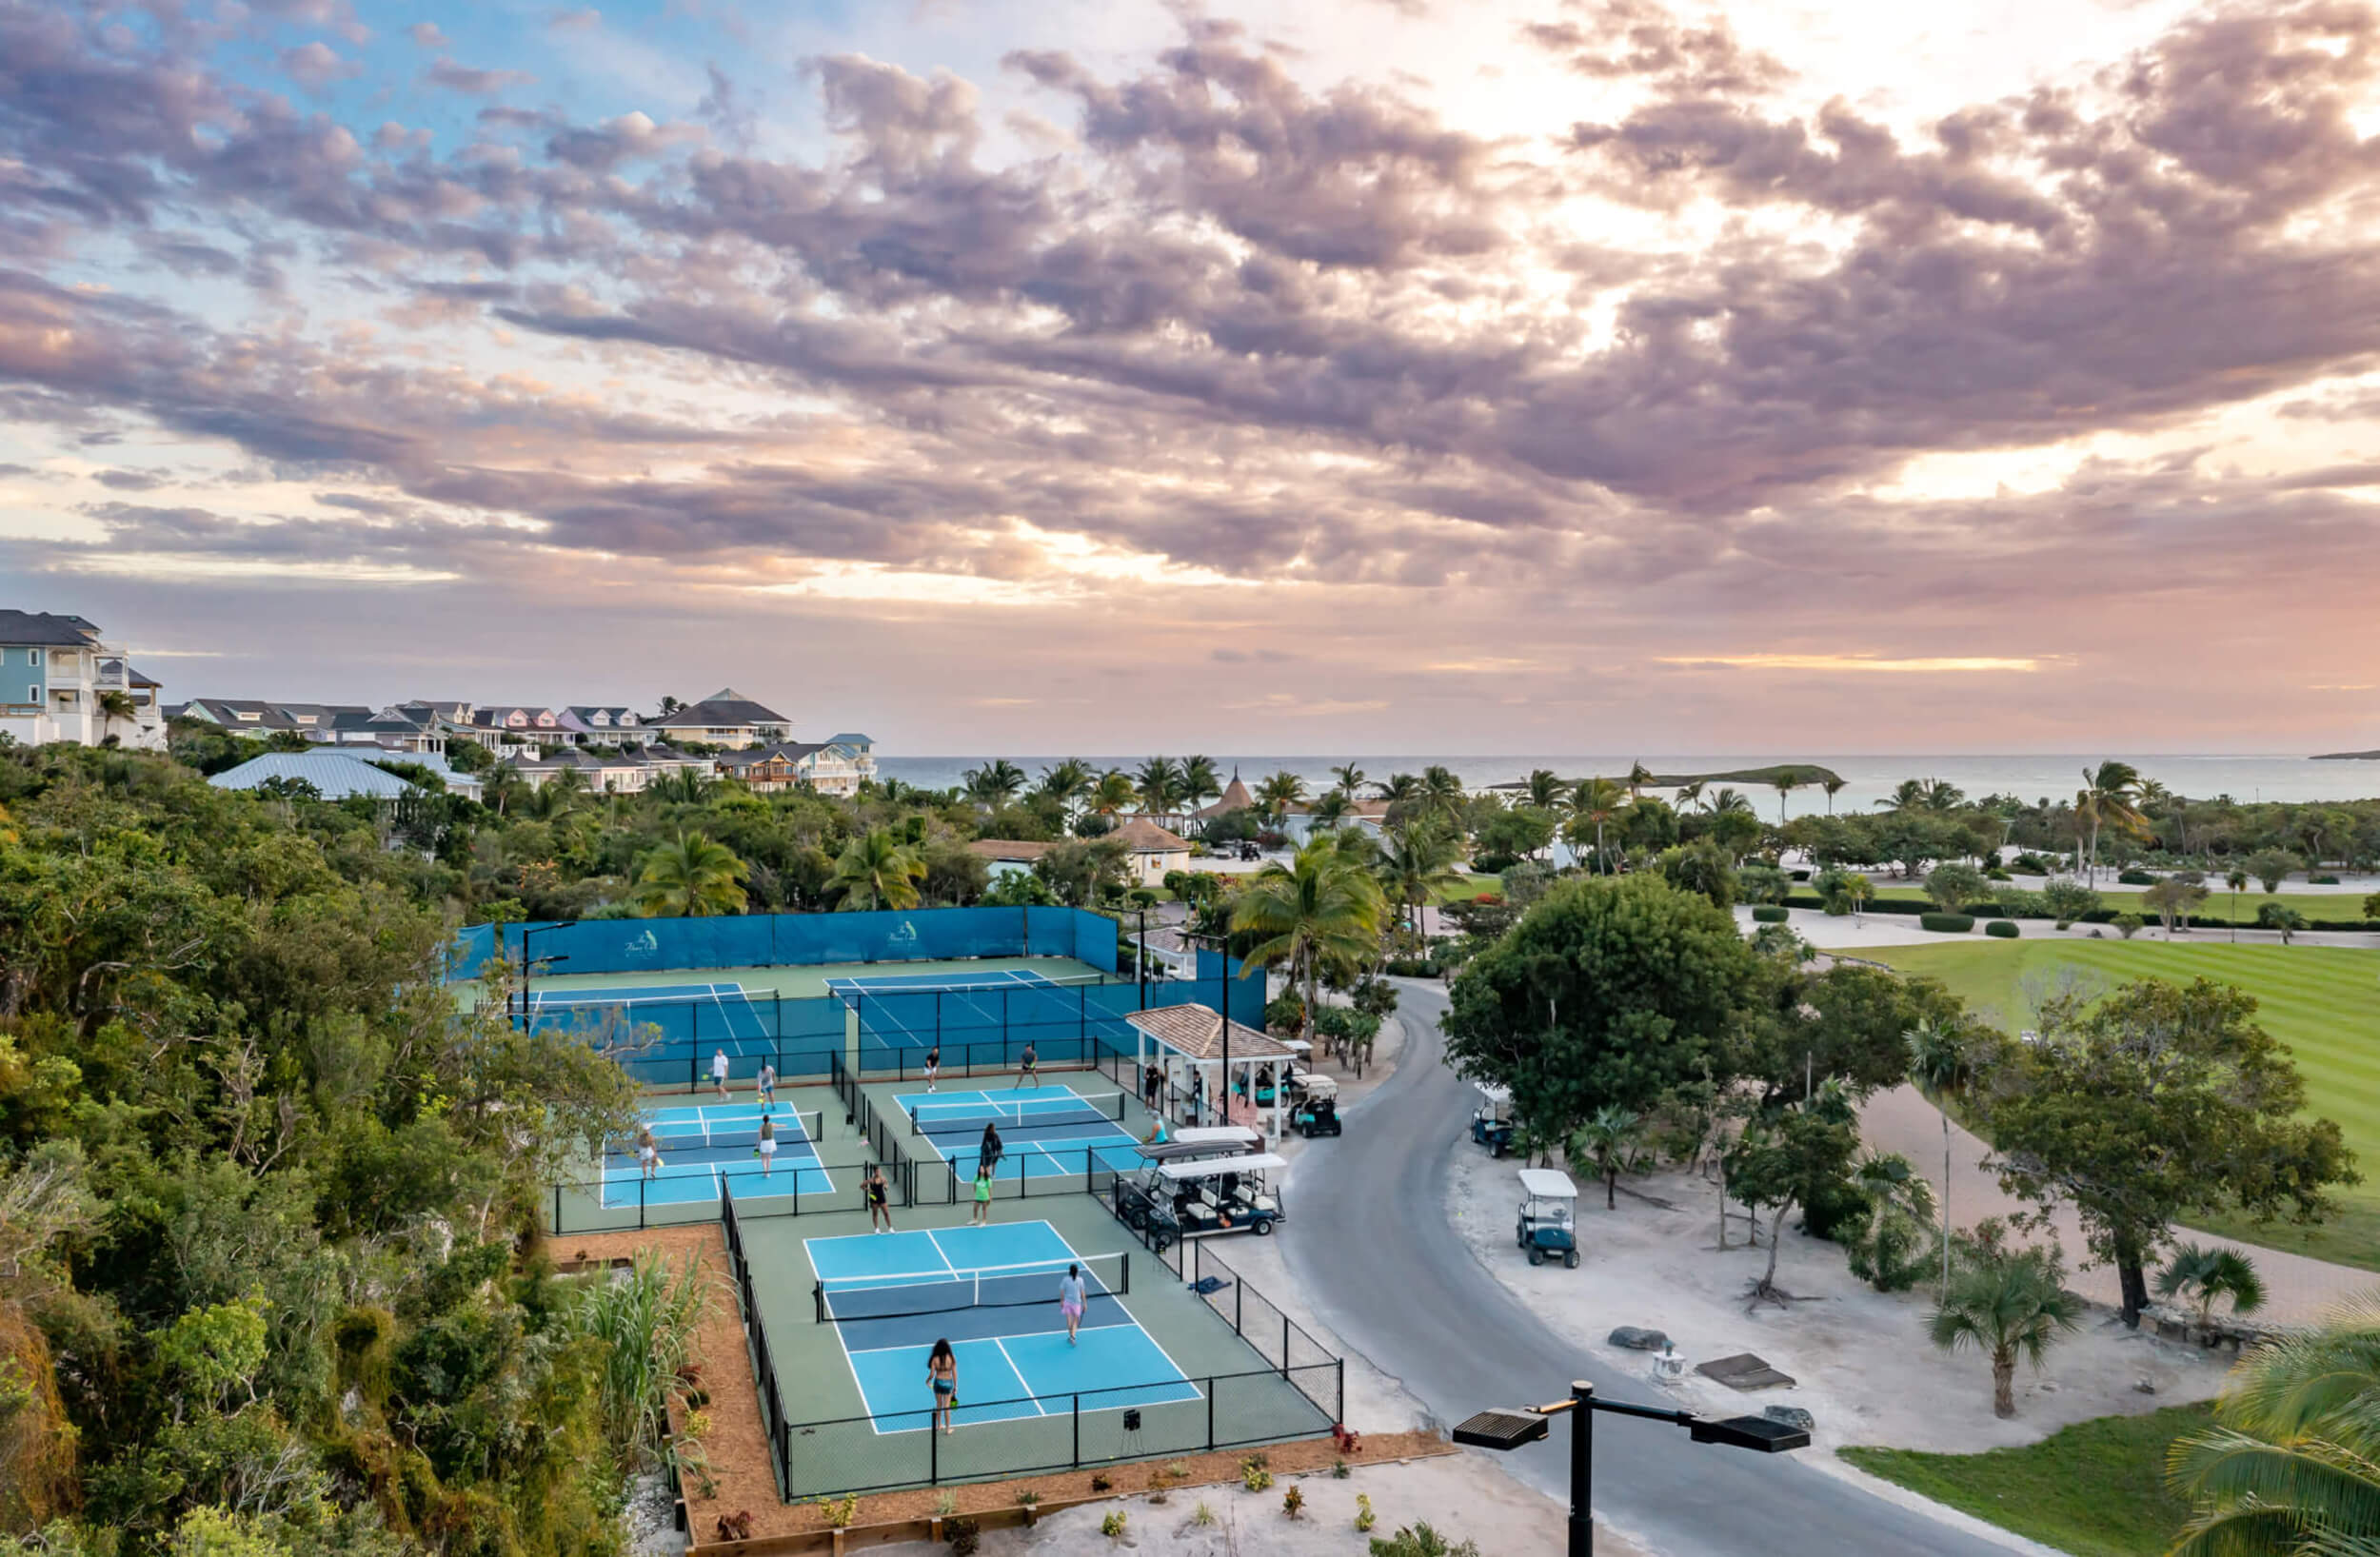 Evening skies over the tennis courts at The Abaco Club, capturing the essence of an active and luxurious club lifestyle